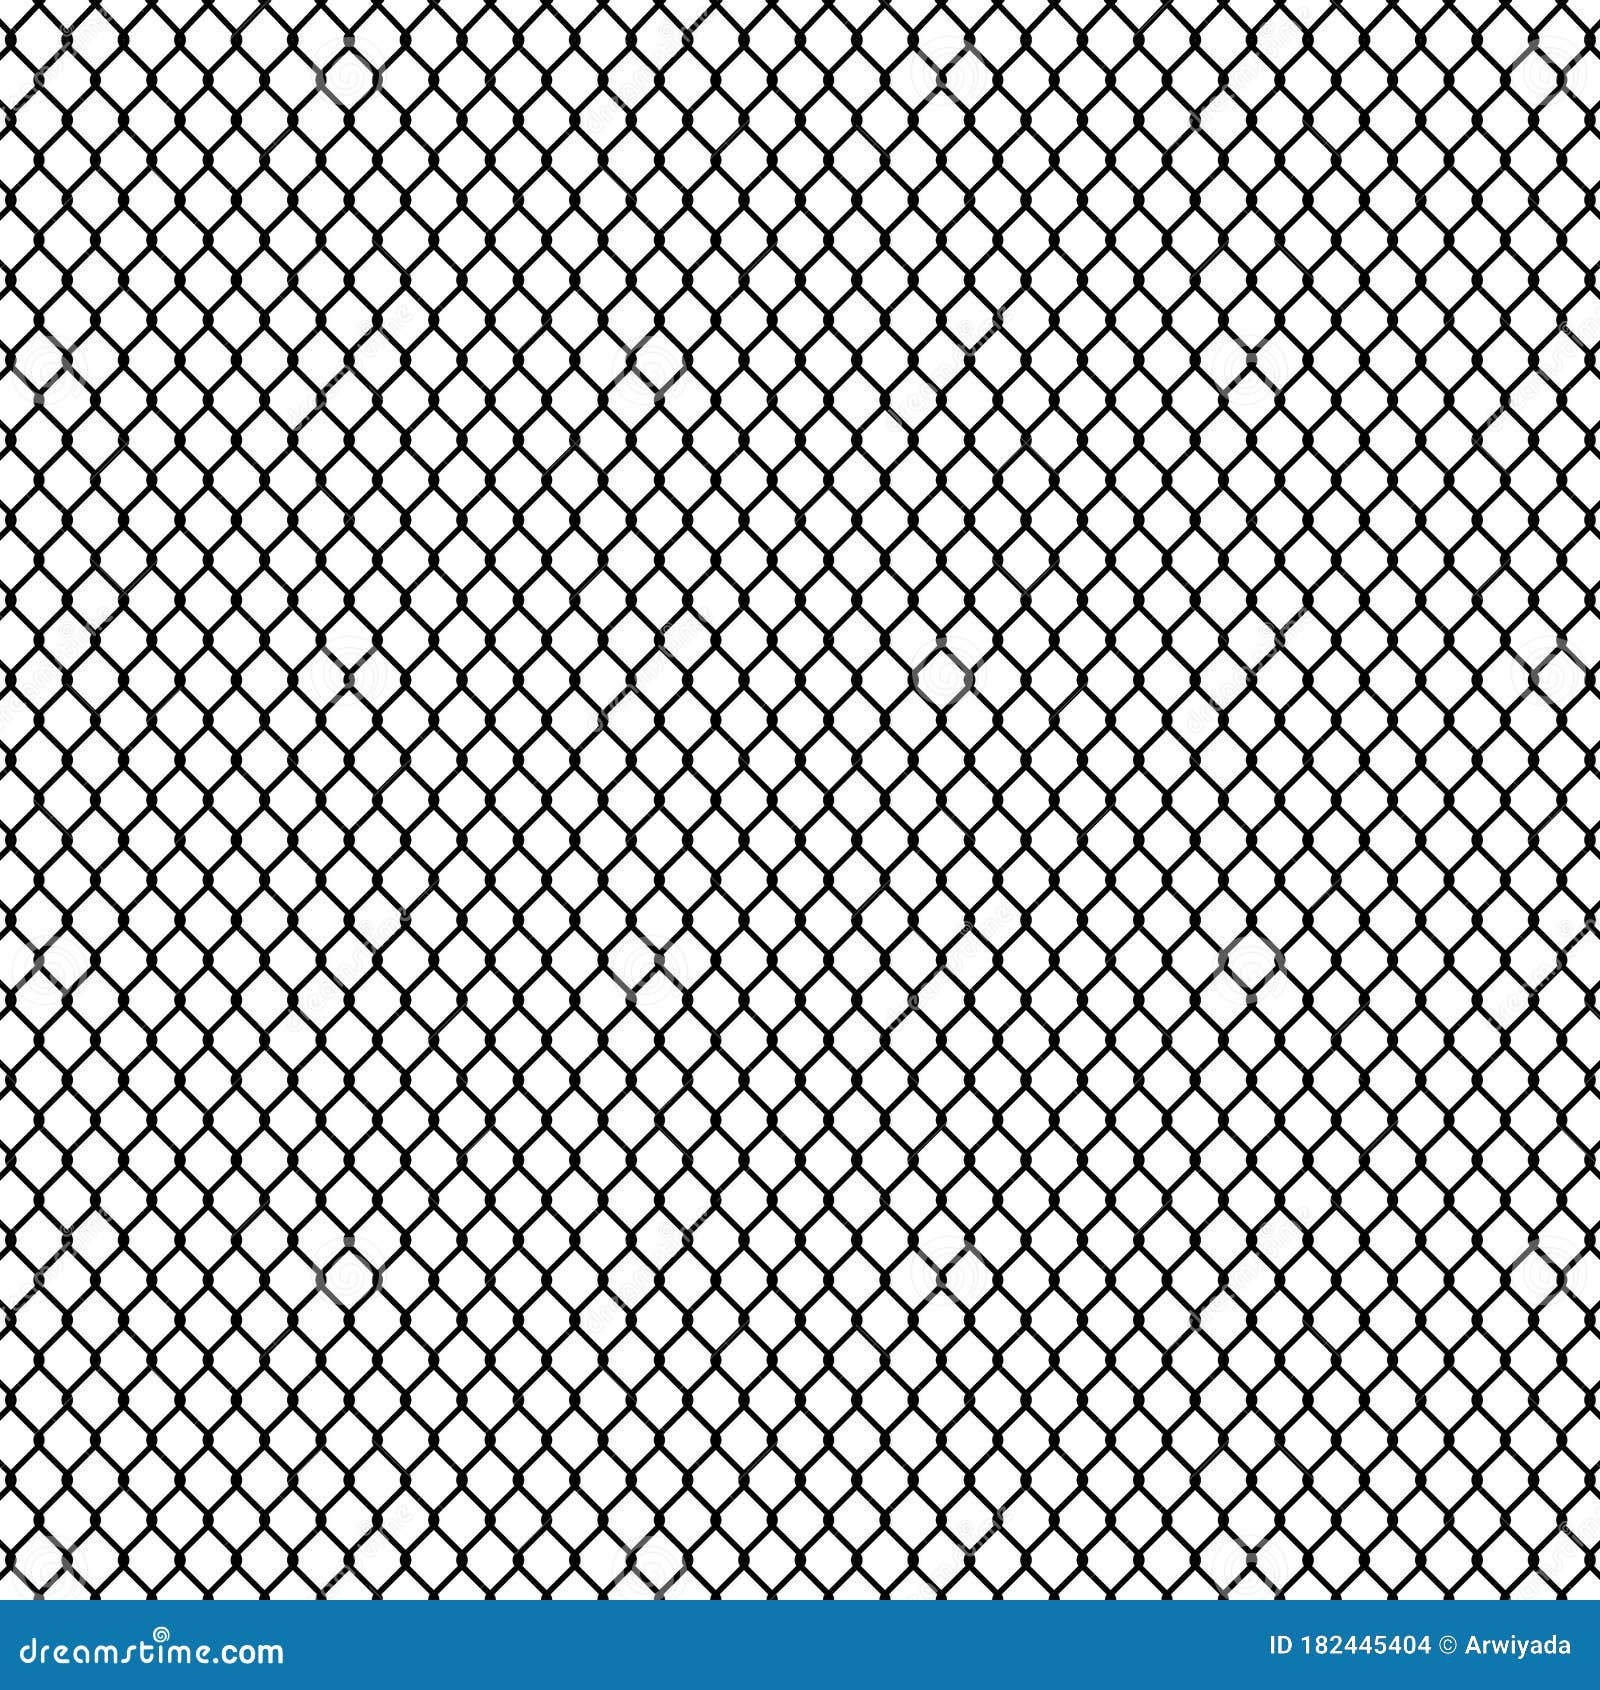 Abstact Steel Mesh Metal Fence Seamless Structure Stock Vector ...